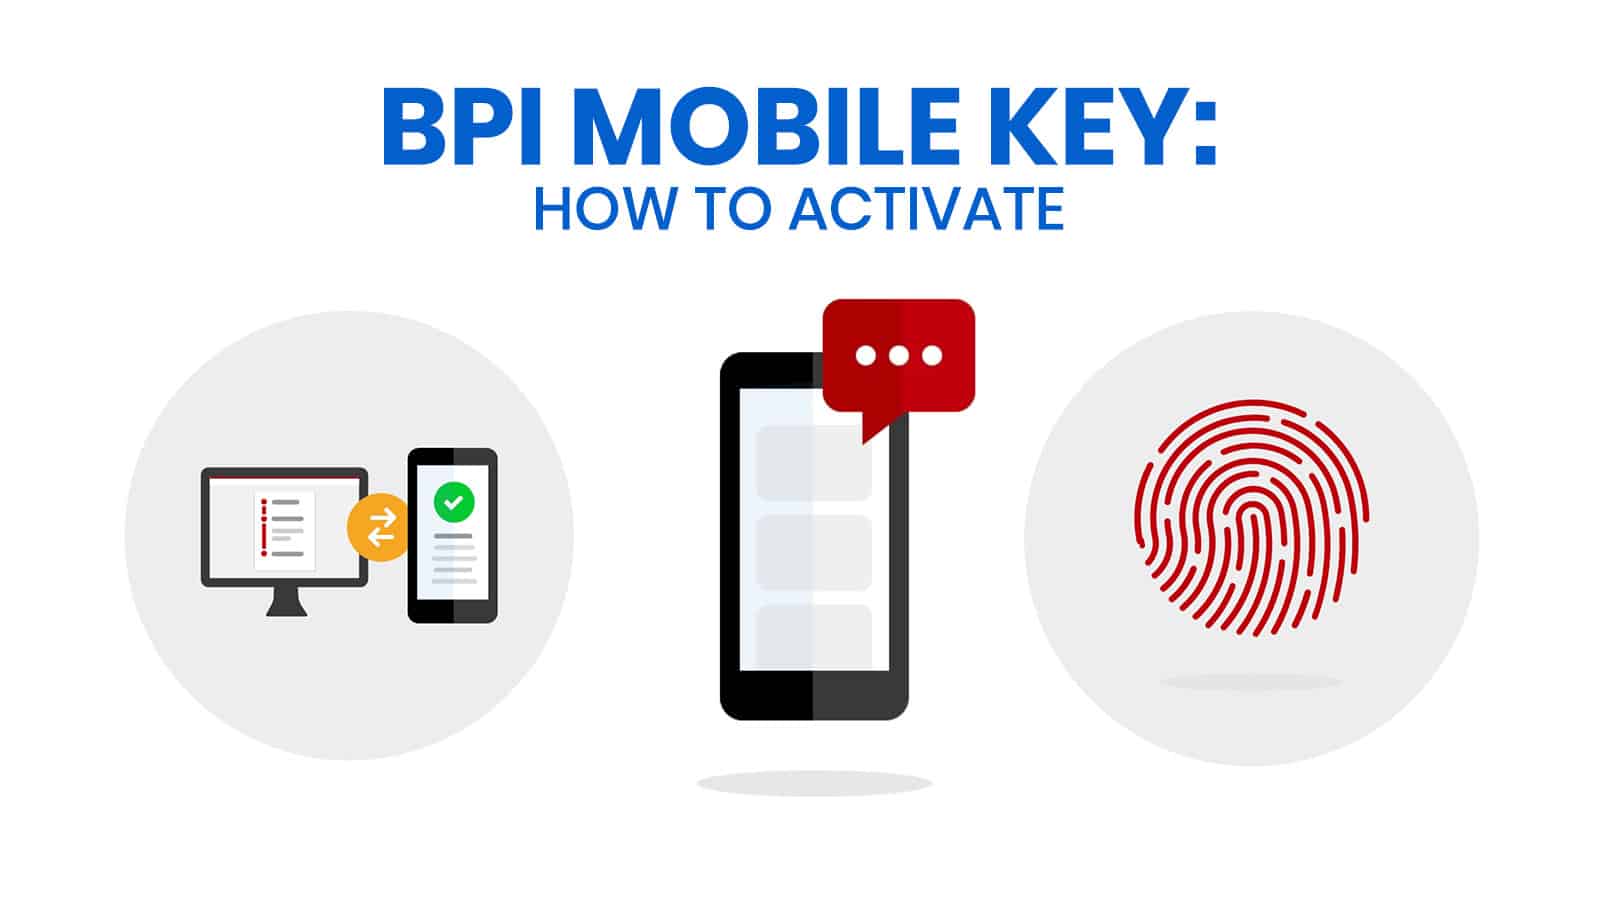 BPI Online Banking: How to Activate Mobile Key